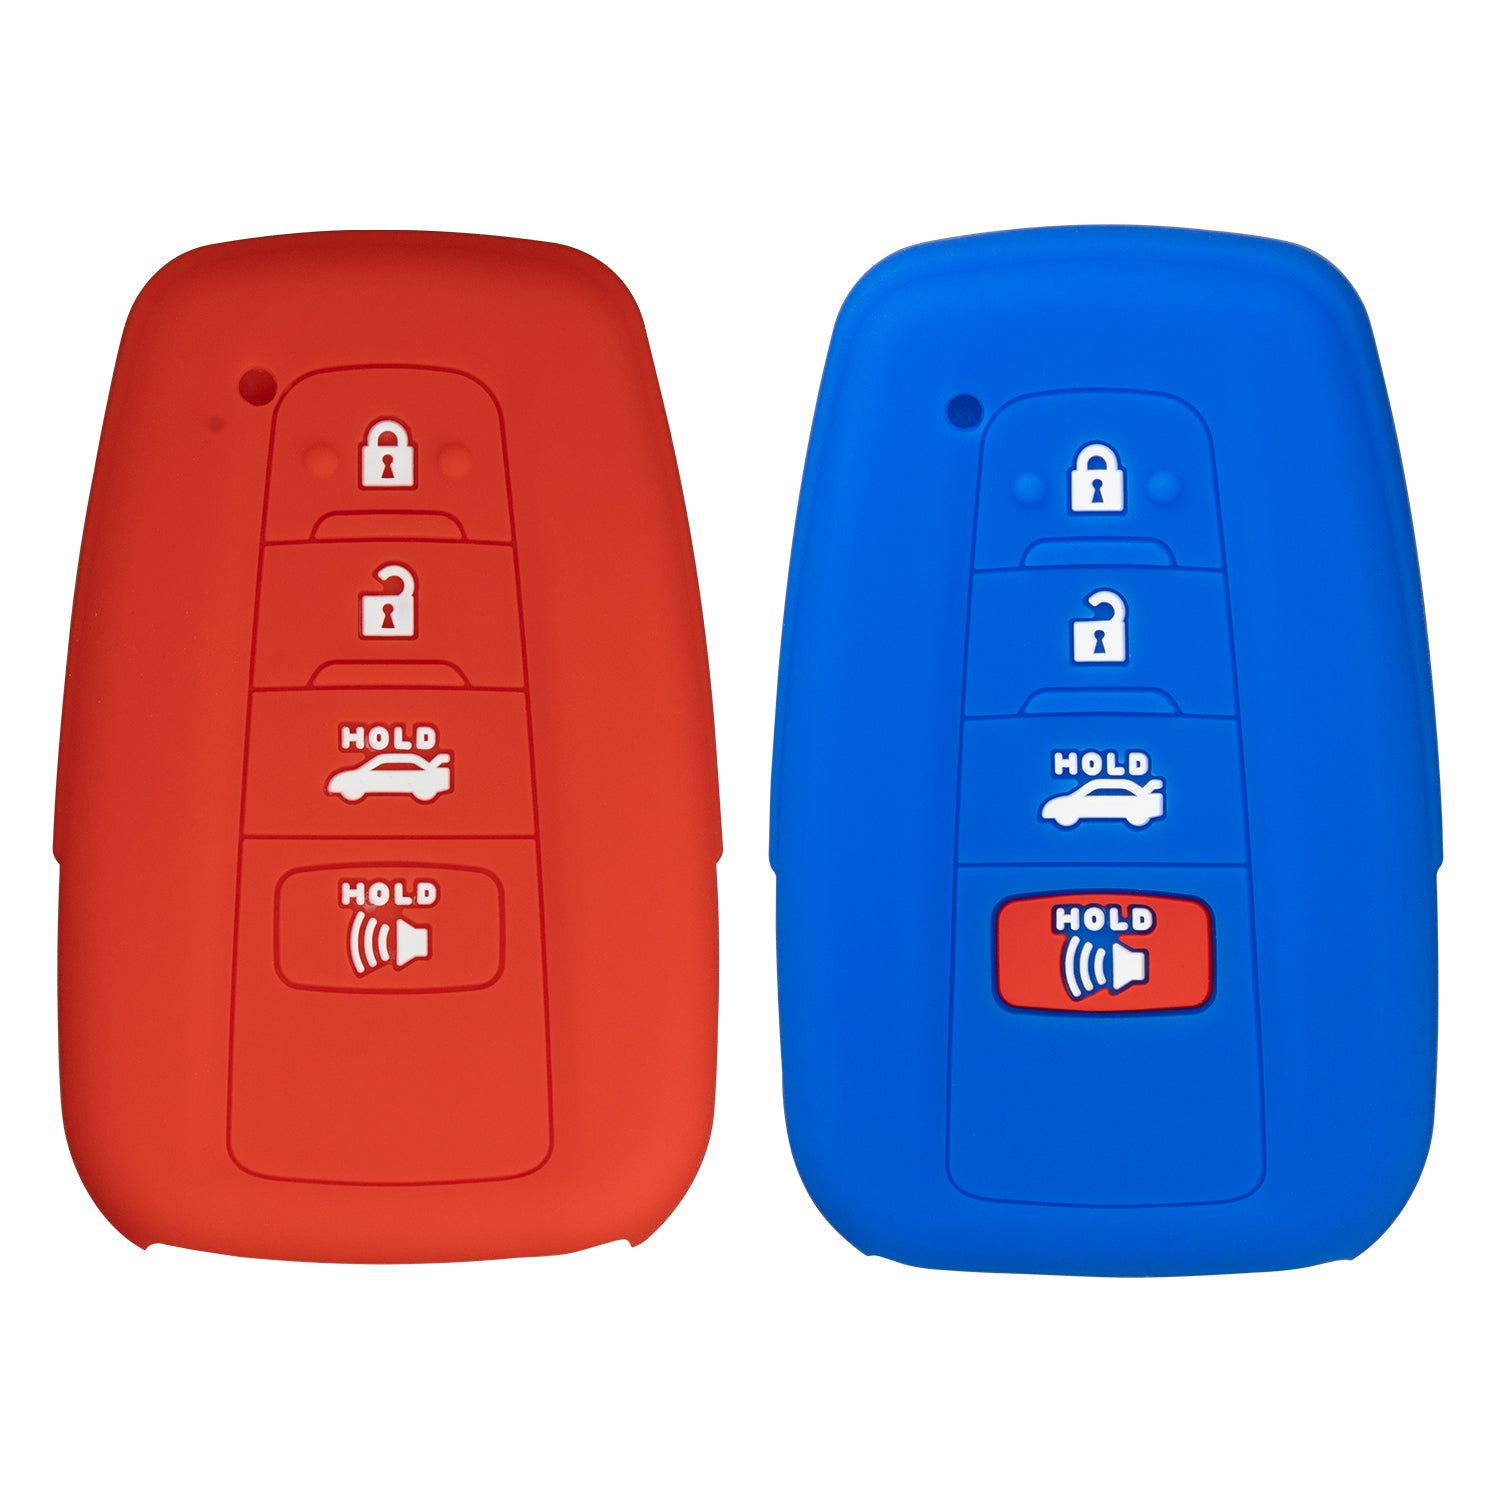 Silicone Case 4 Button Shell for Toyota Smart Proximity Remote Key HYQ14FBE, HYQ14FBC, HYQ14AHP, HYQ14FBN (Blue & Red)